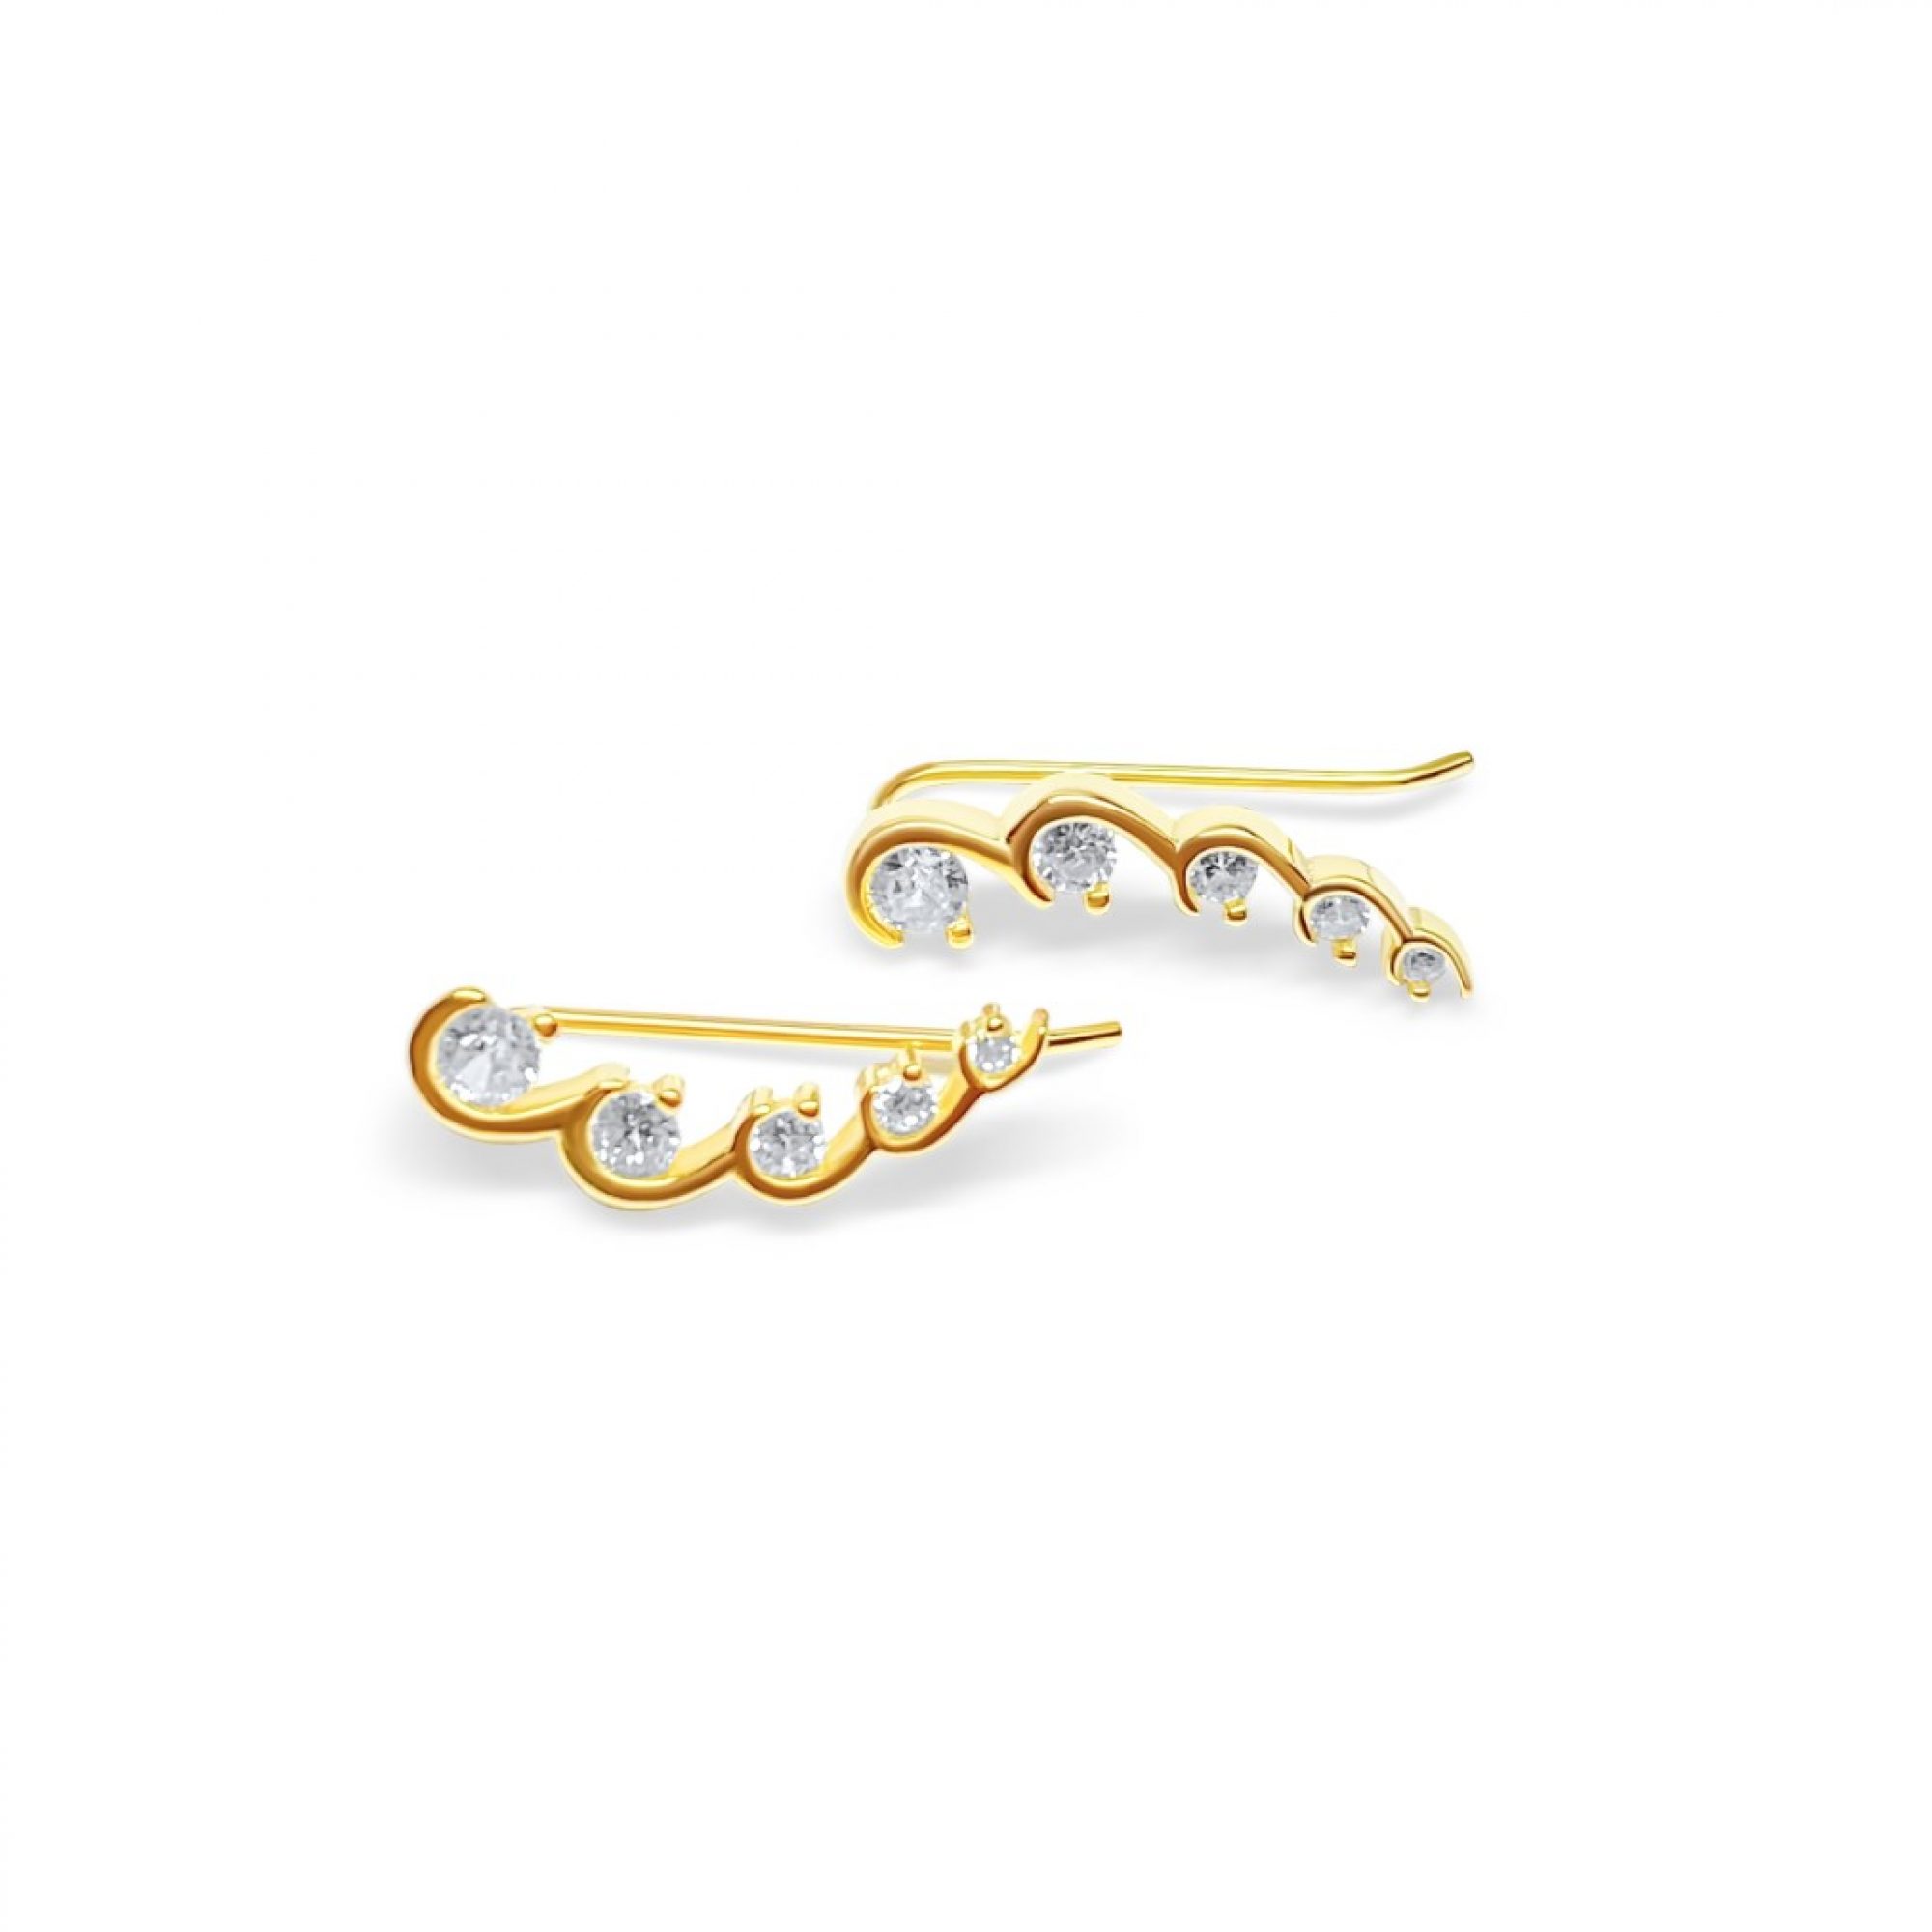 Gold plated ear climbers with zircon stones